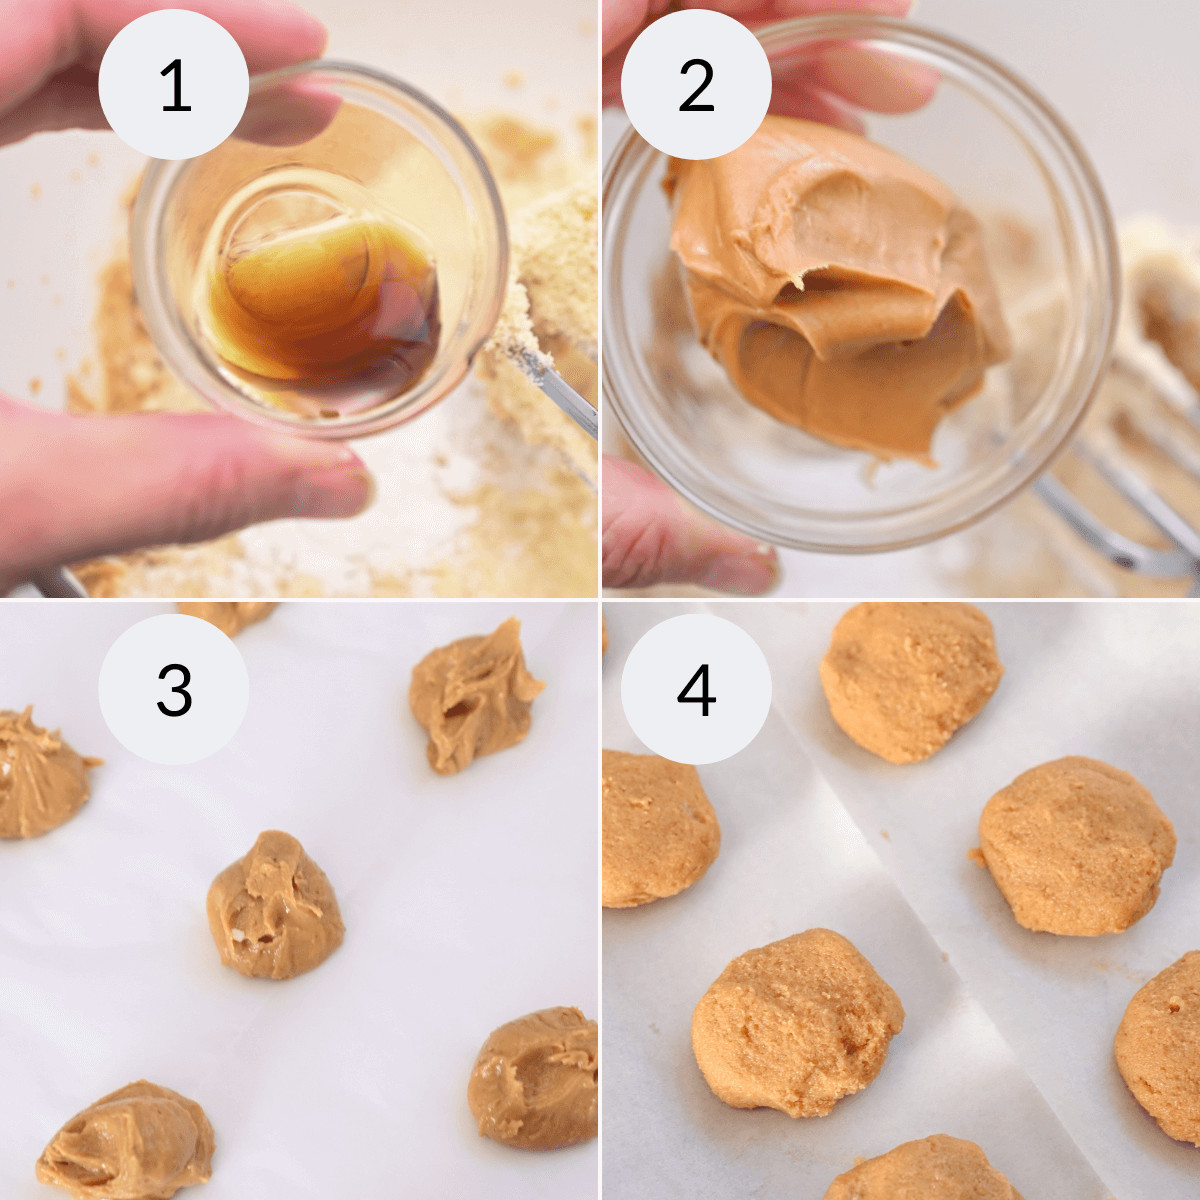 Learn how to make irresistibly delicious peanut butter cookies stuffed with creamy peanut butter filling.